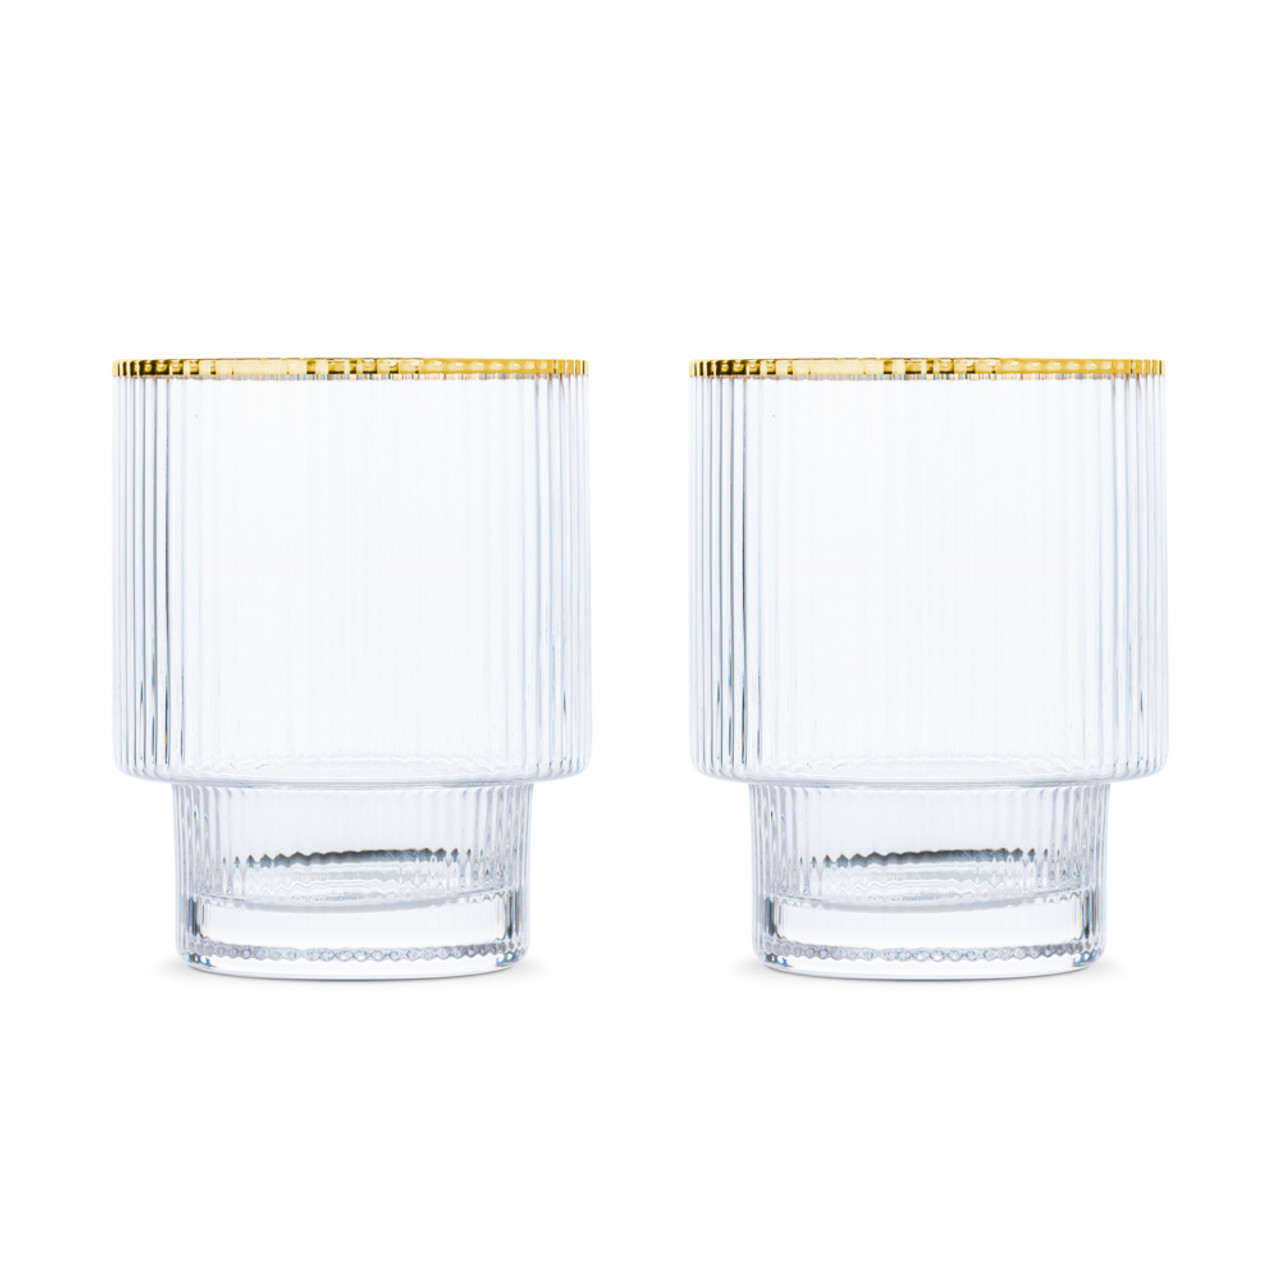 https://cdn11.bigcommerce.com/s-cznxq08r7/images/stencil/1280x1280/products/5430/14701/10520_-_Viski_Meridian_Crystal_Stackable_Lowball_Tumblers_with_Gold_Rims_-_12_oz_-_Set_of_2_01__09398.1662493344.jpg?c=1